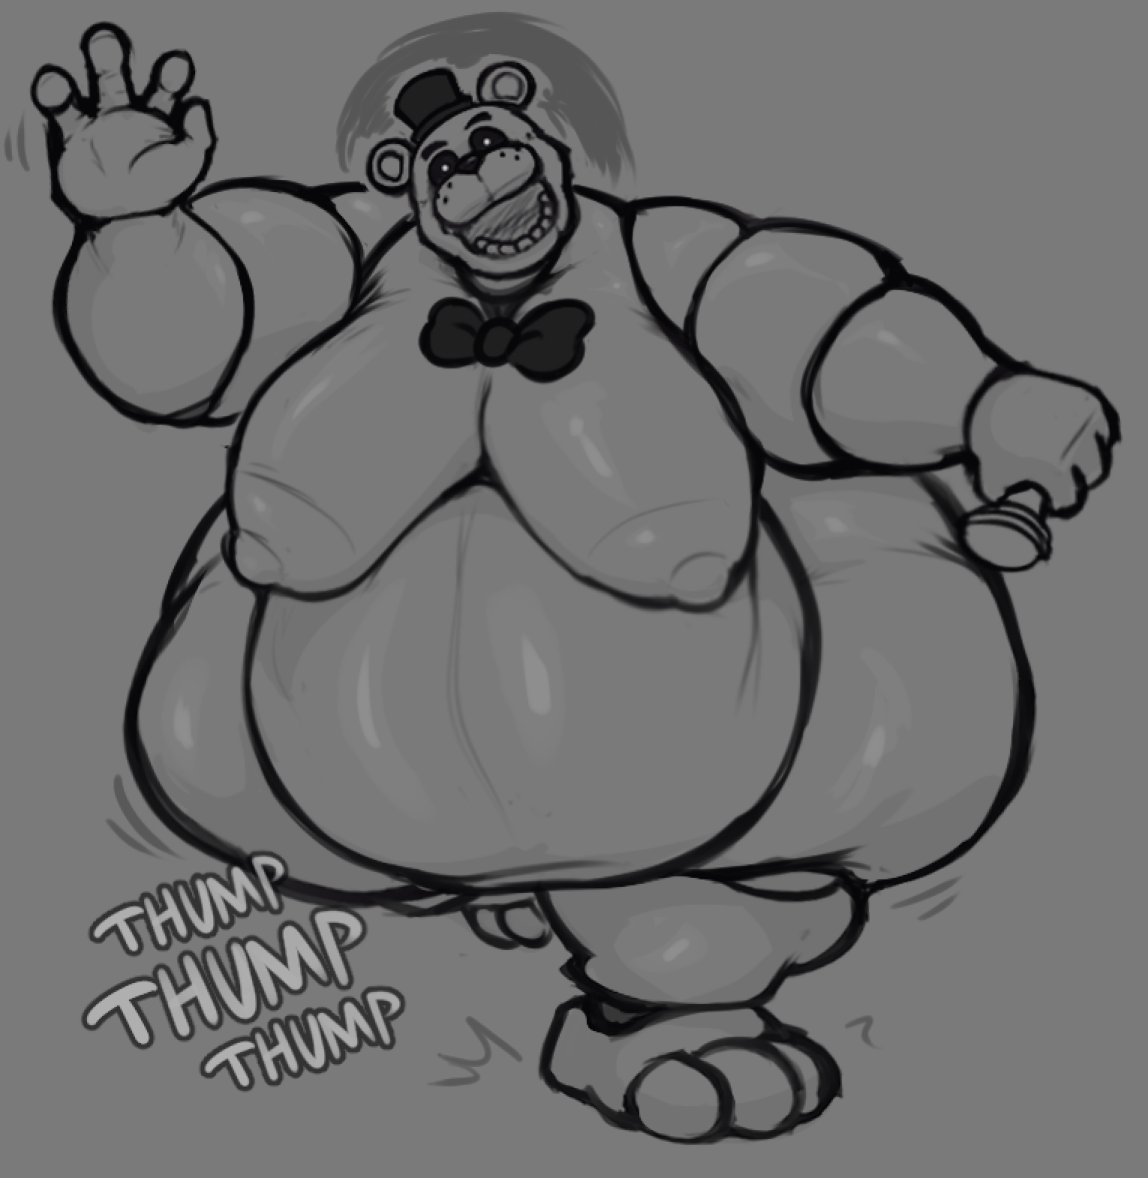 Also for the true 'fat bitch enjoyers', golden freddy but huge...